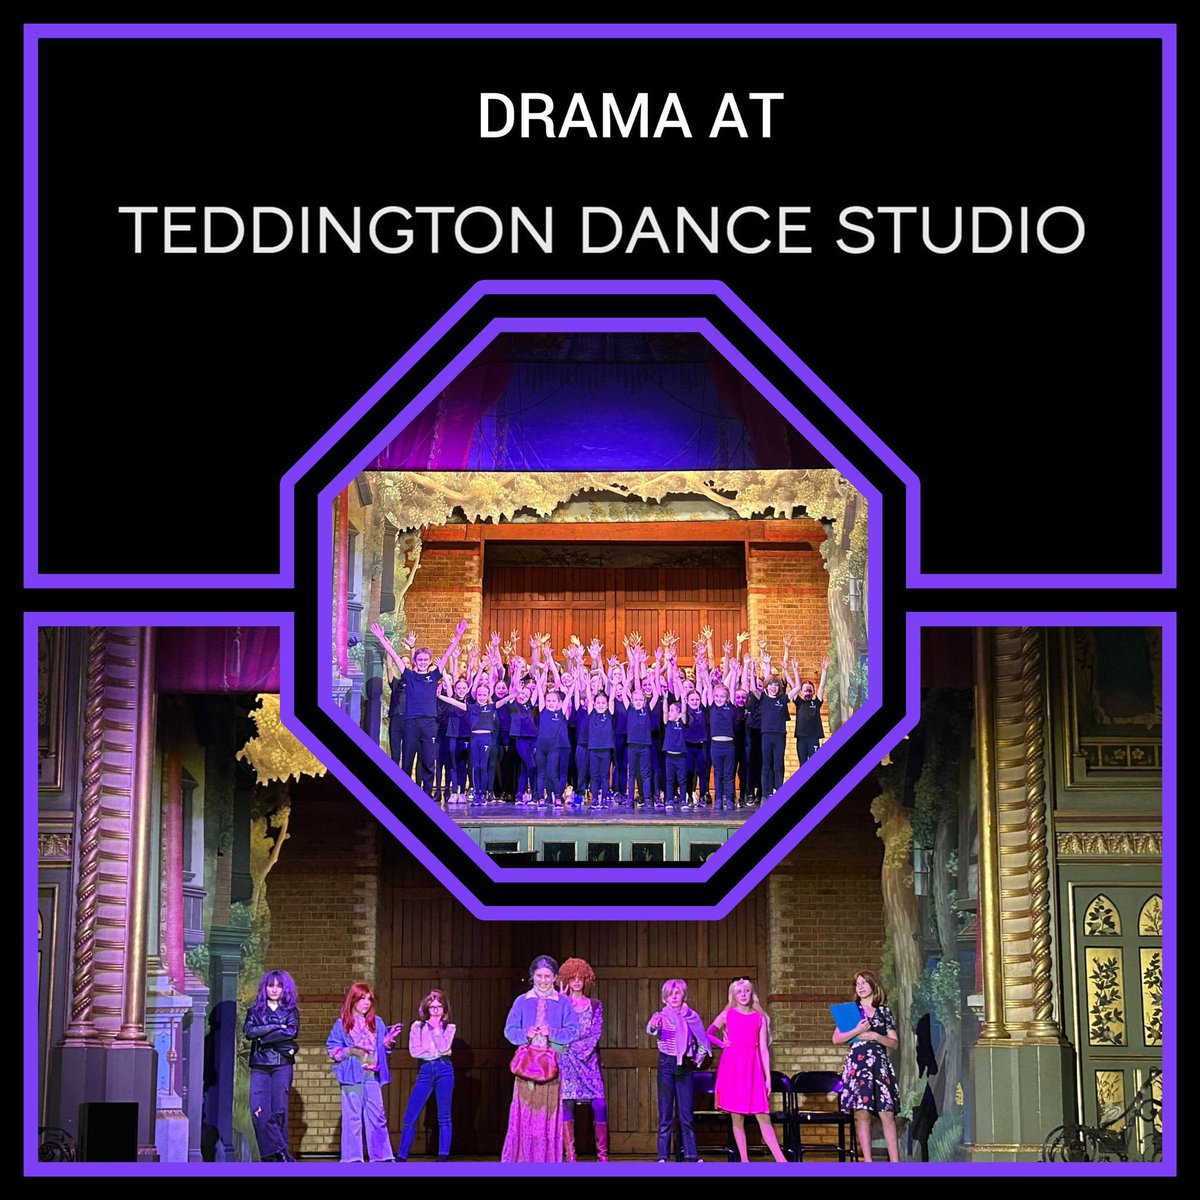 Drama at @tds_lovedance . At Teddington Dance Studio - Grow in confidence, performance opportunities, LAMDA Exams, Acting Awards… we’ve got it all! #teddington #teddingtonmums #teddingtontown #teddingtondancestudio #teddingtondramaclasses #teddingtondanceclasses